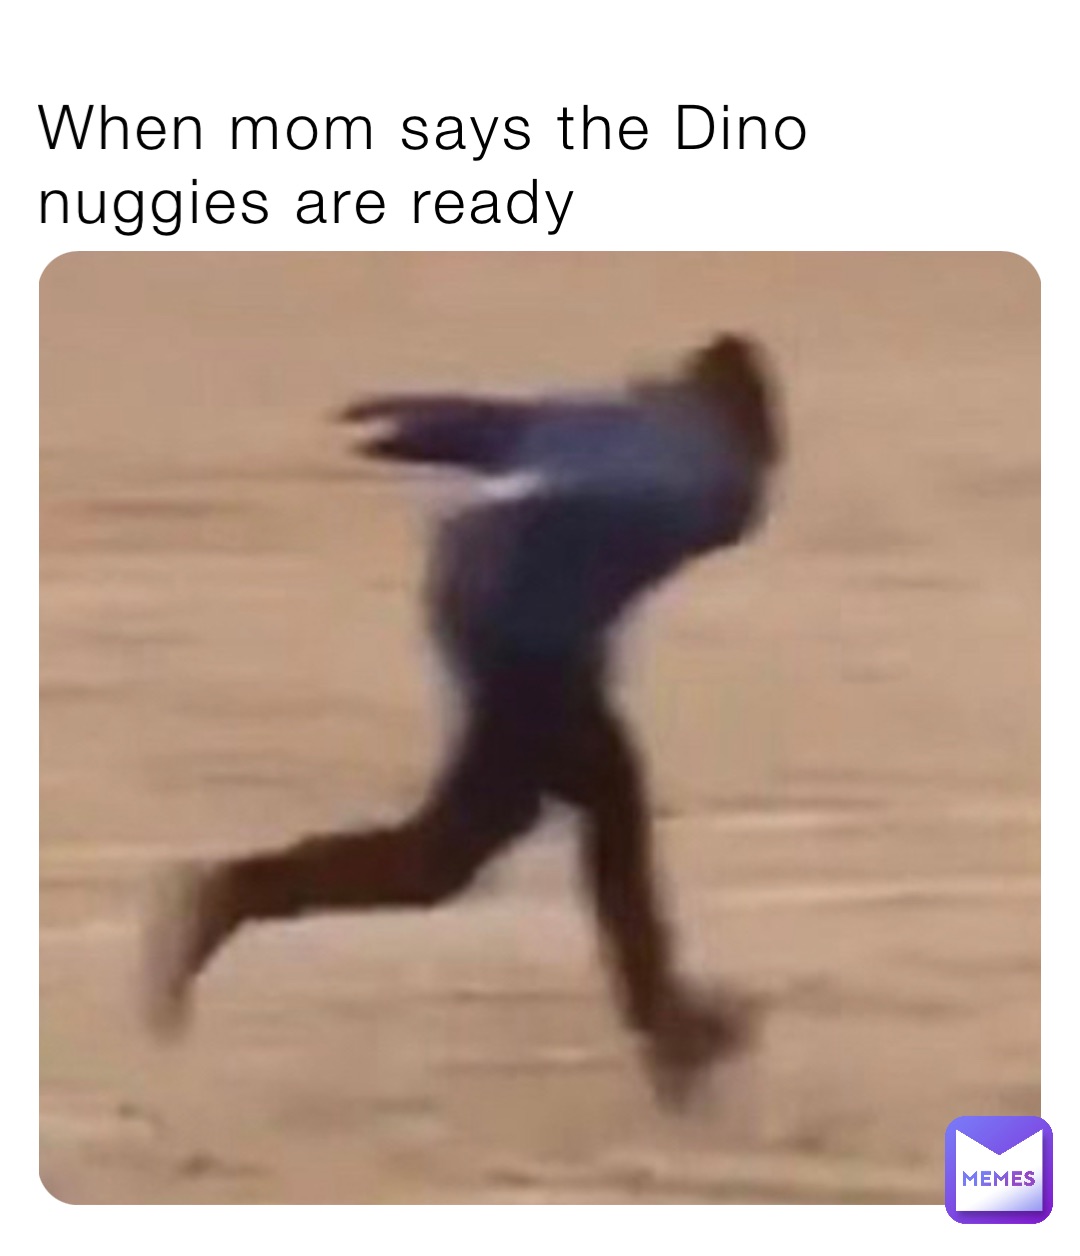 When mom says the Dino nuggies are ready